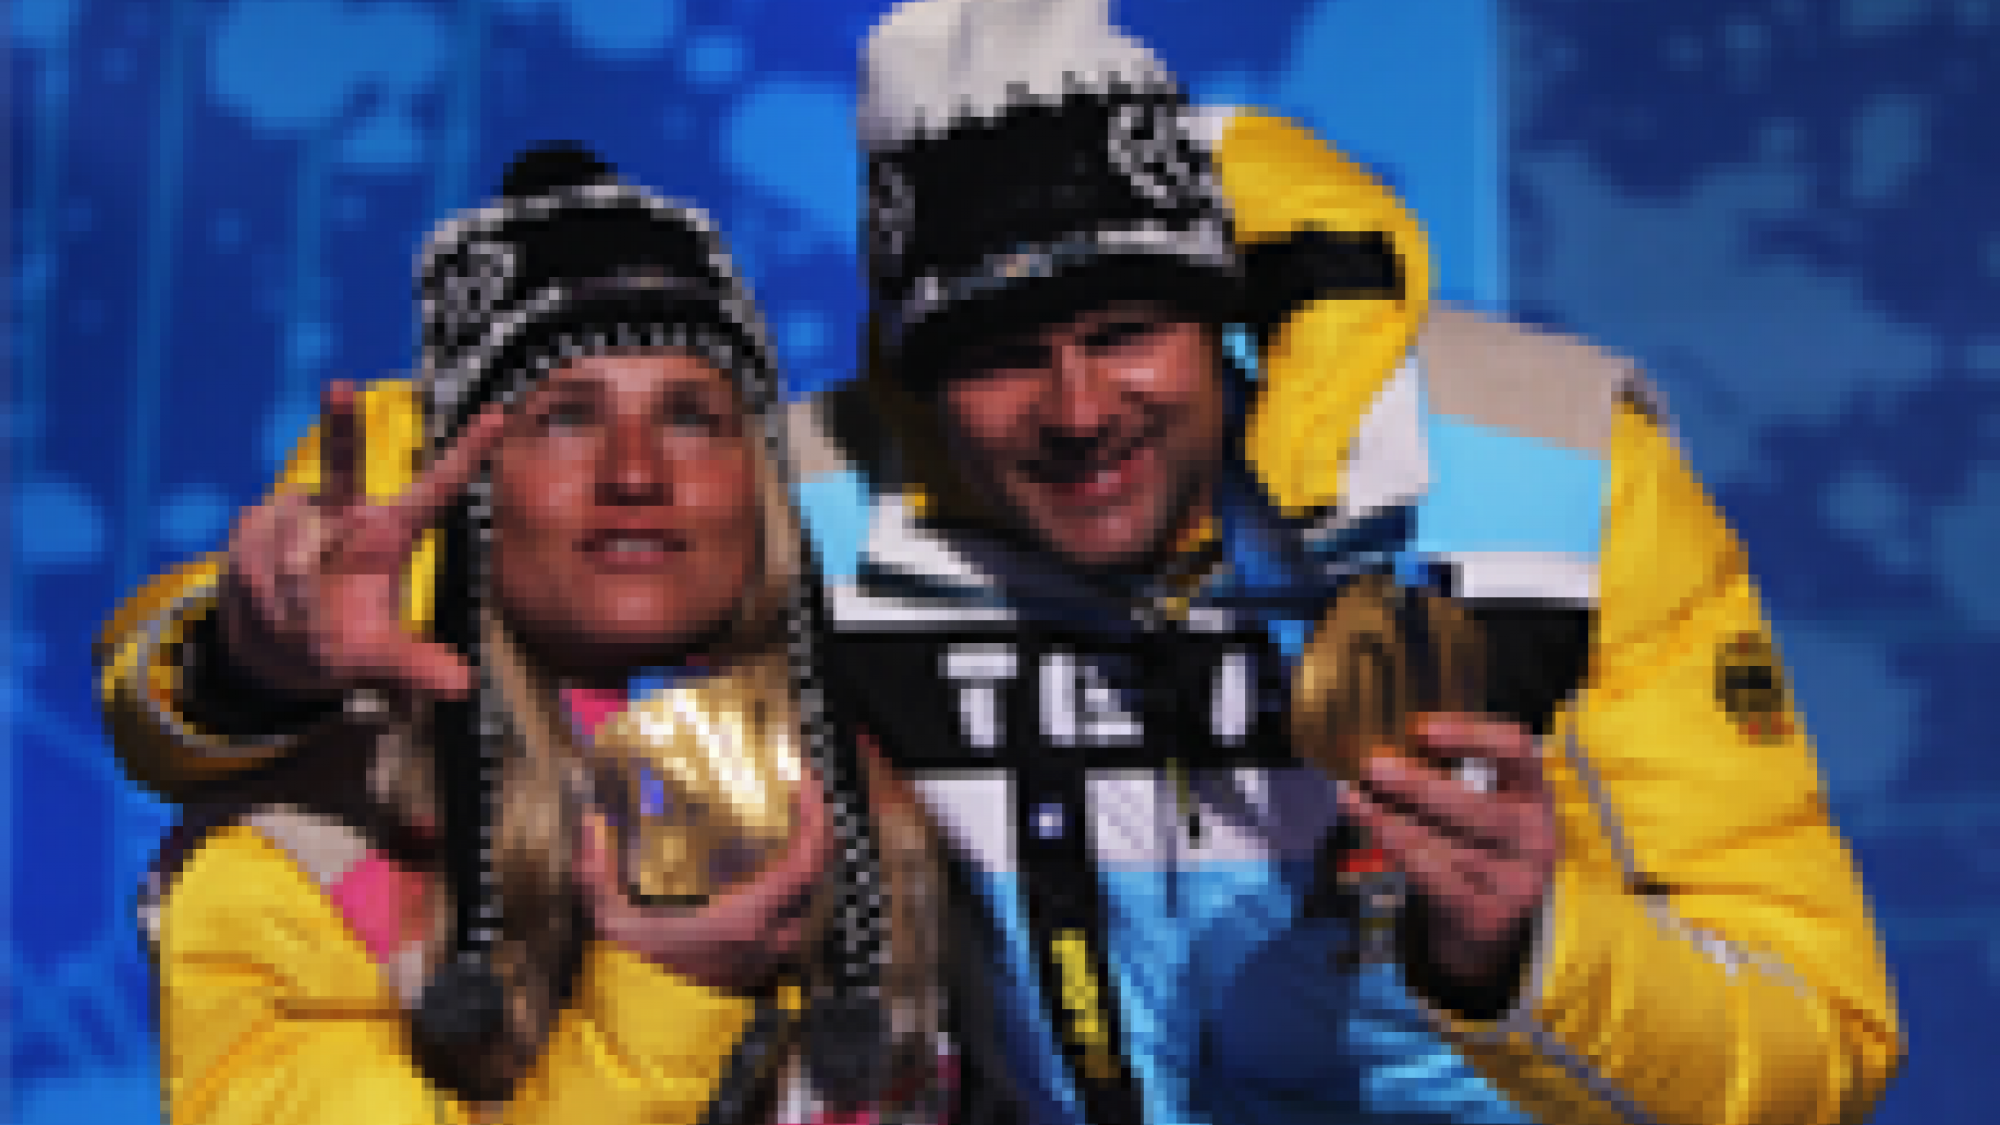 A picture of a woman showing her gold medal with a man during a medal ceremony